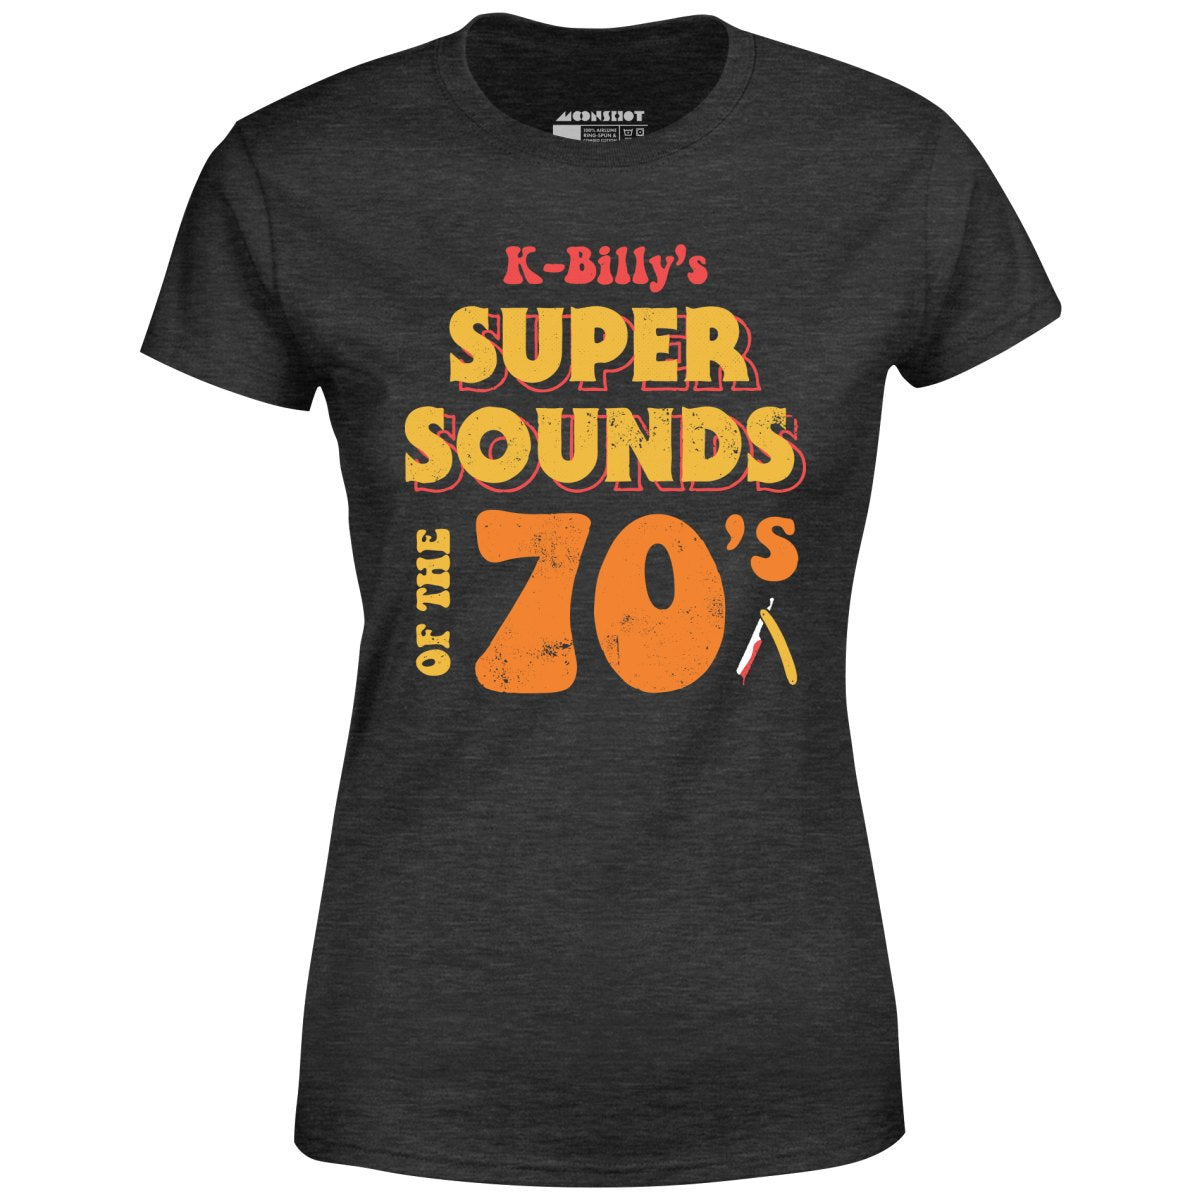 K-Billy's Super Sounds of the 70s - Women's T-Shirt